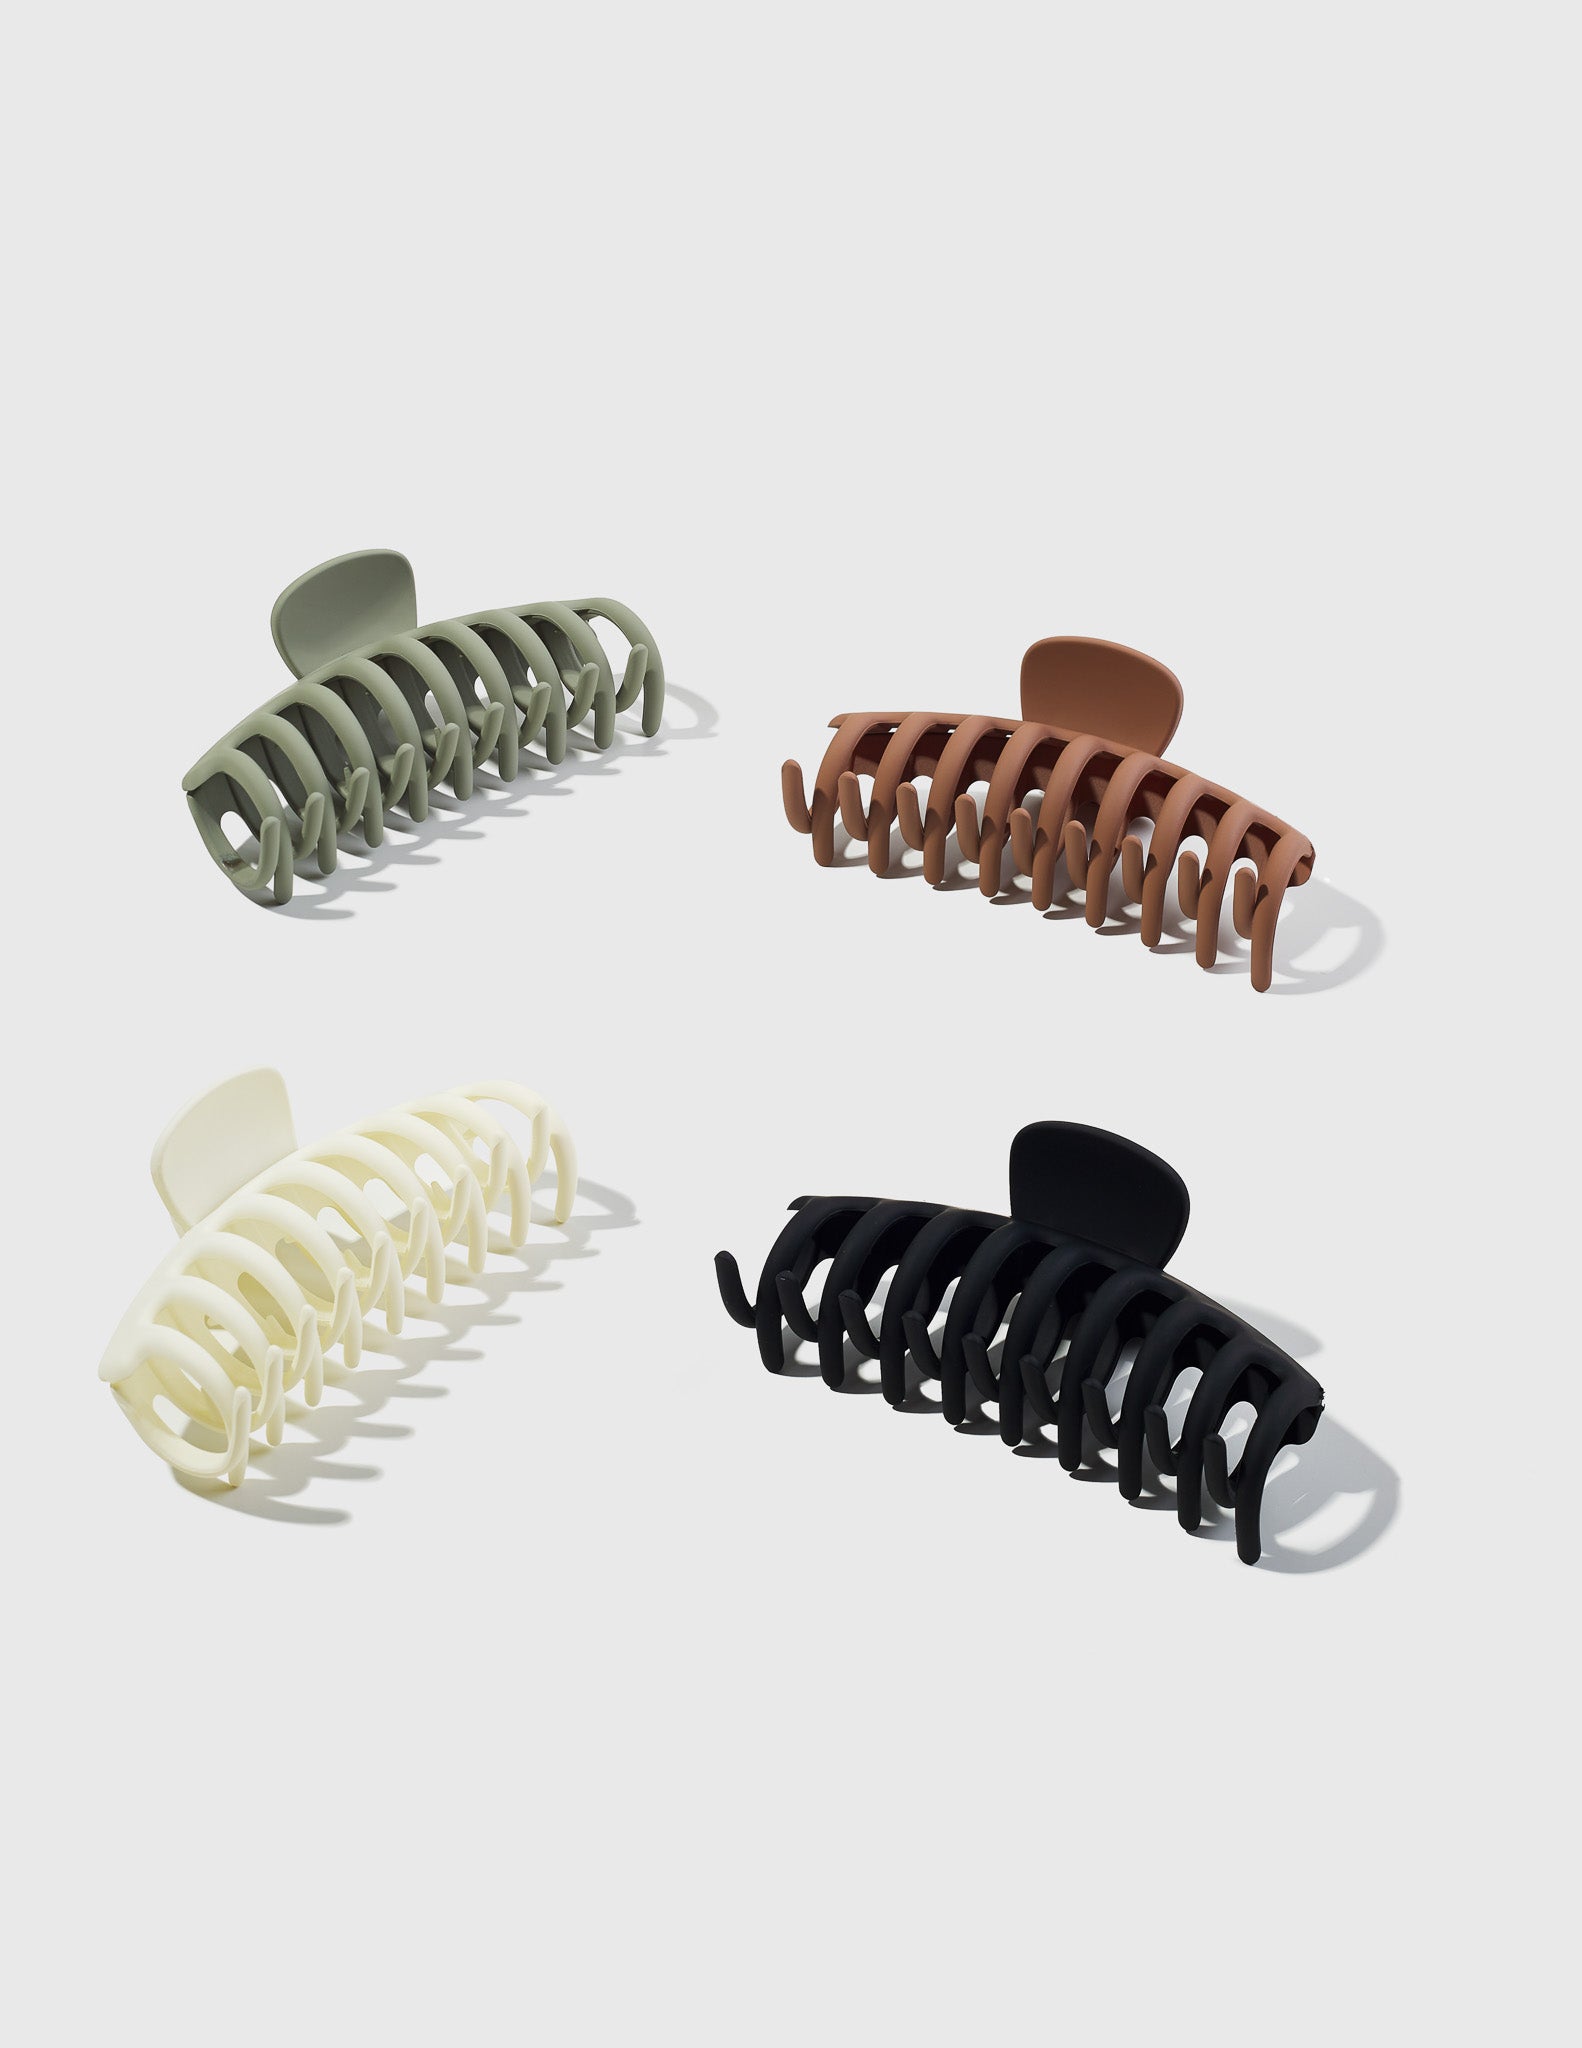 Claw Clips - Neutral - Trademark Beauty